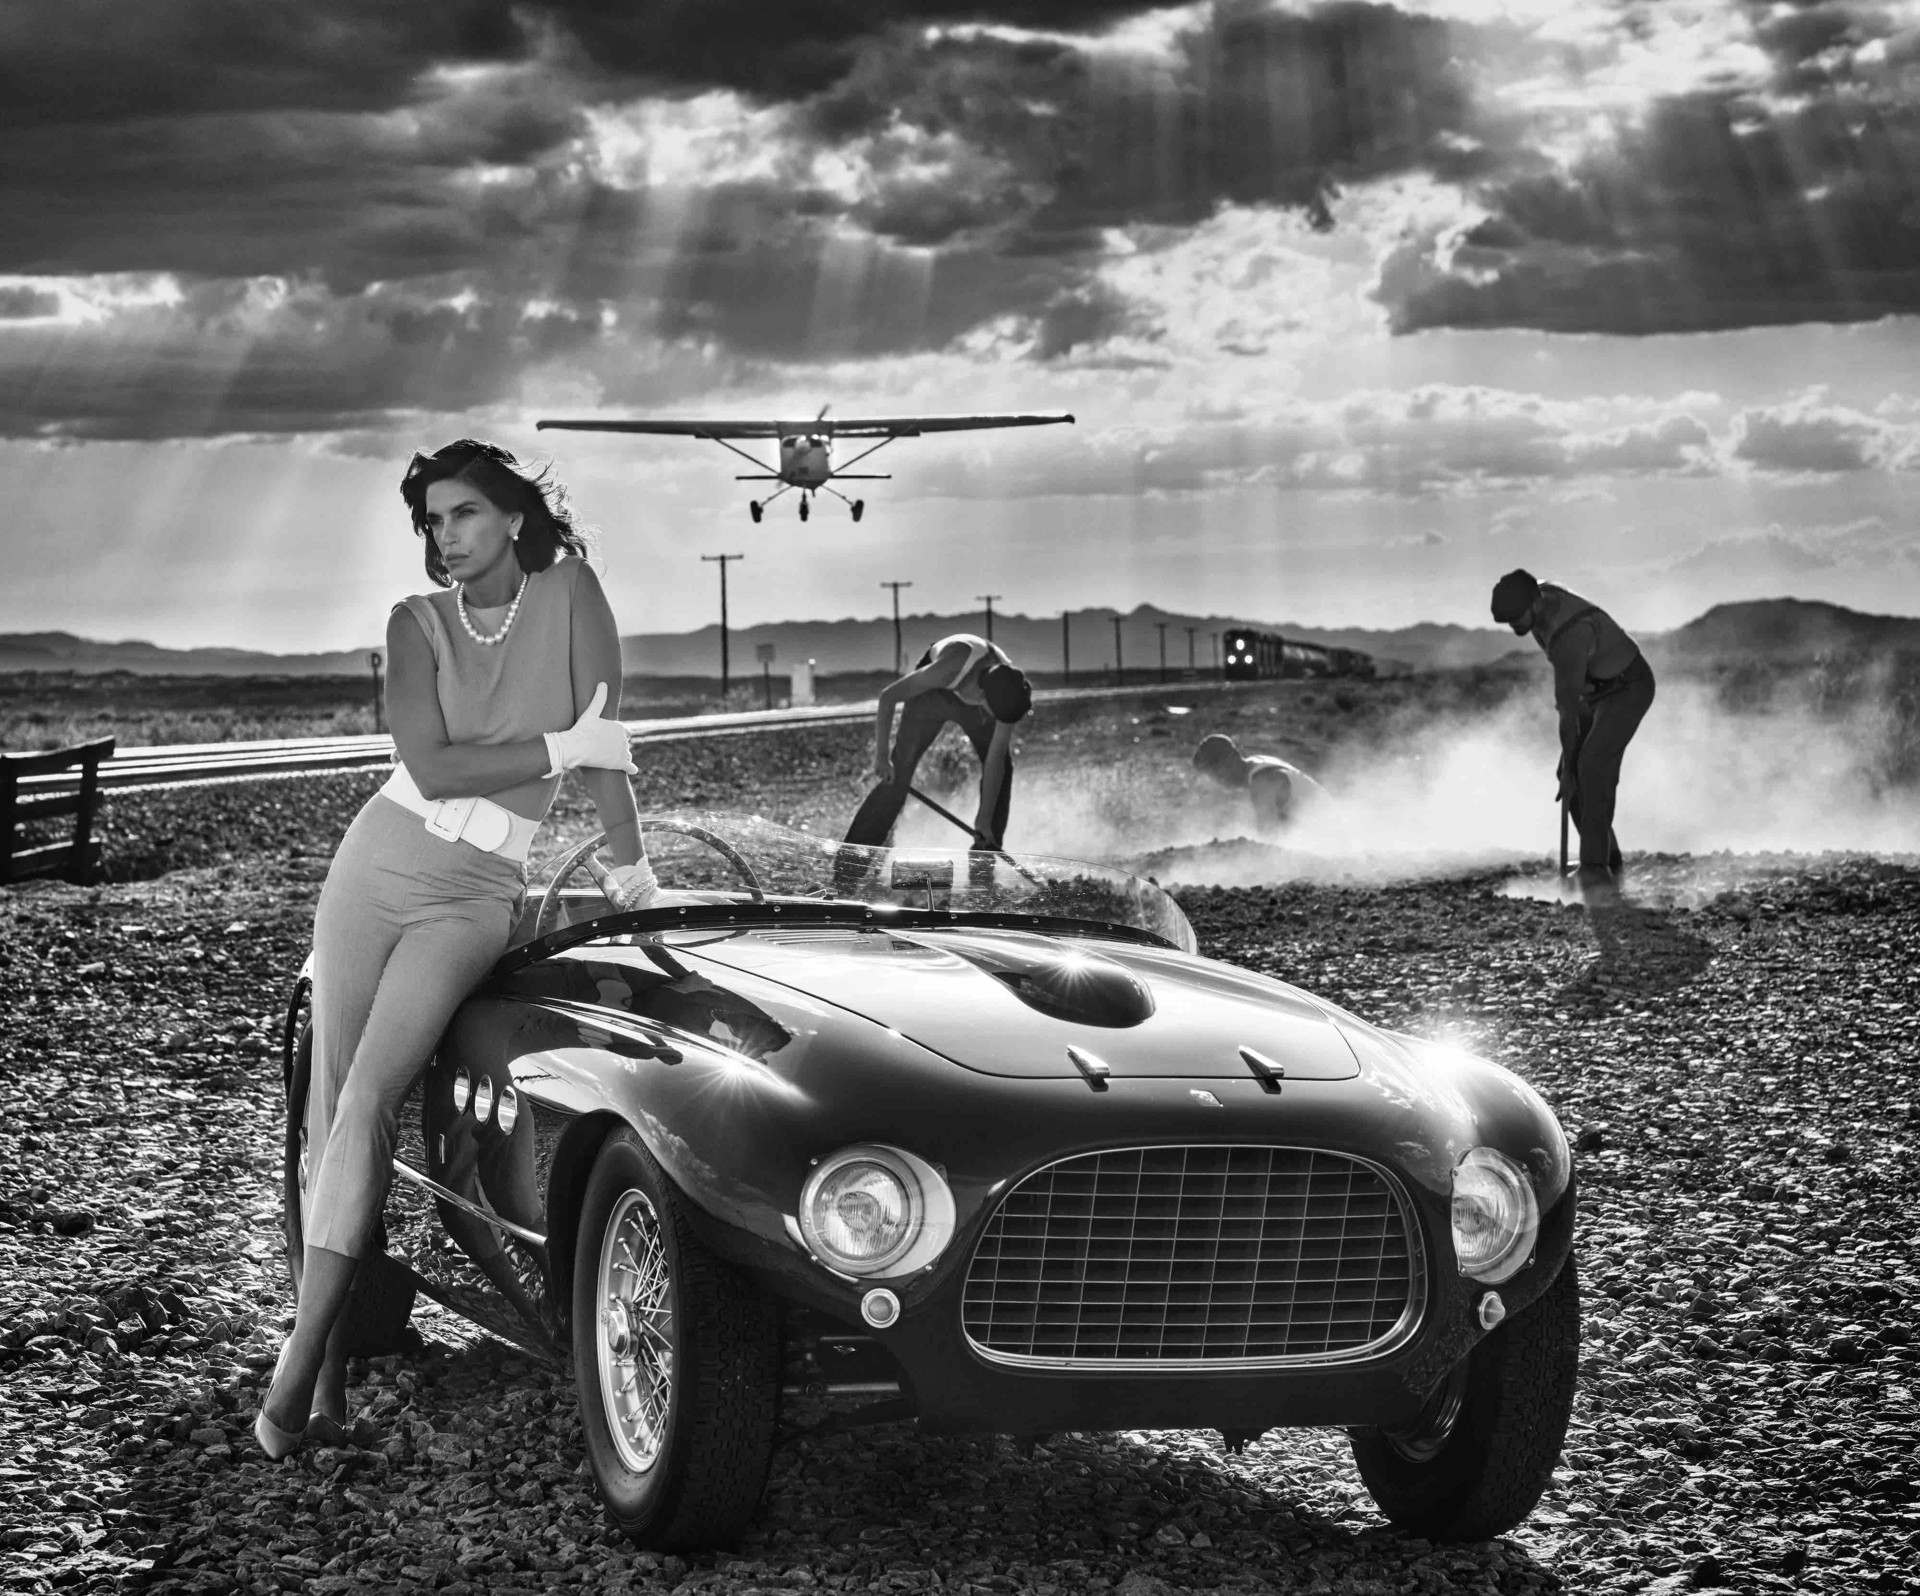 Planes, Trains and Automobiles by David Yarrow